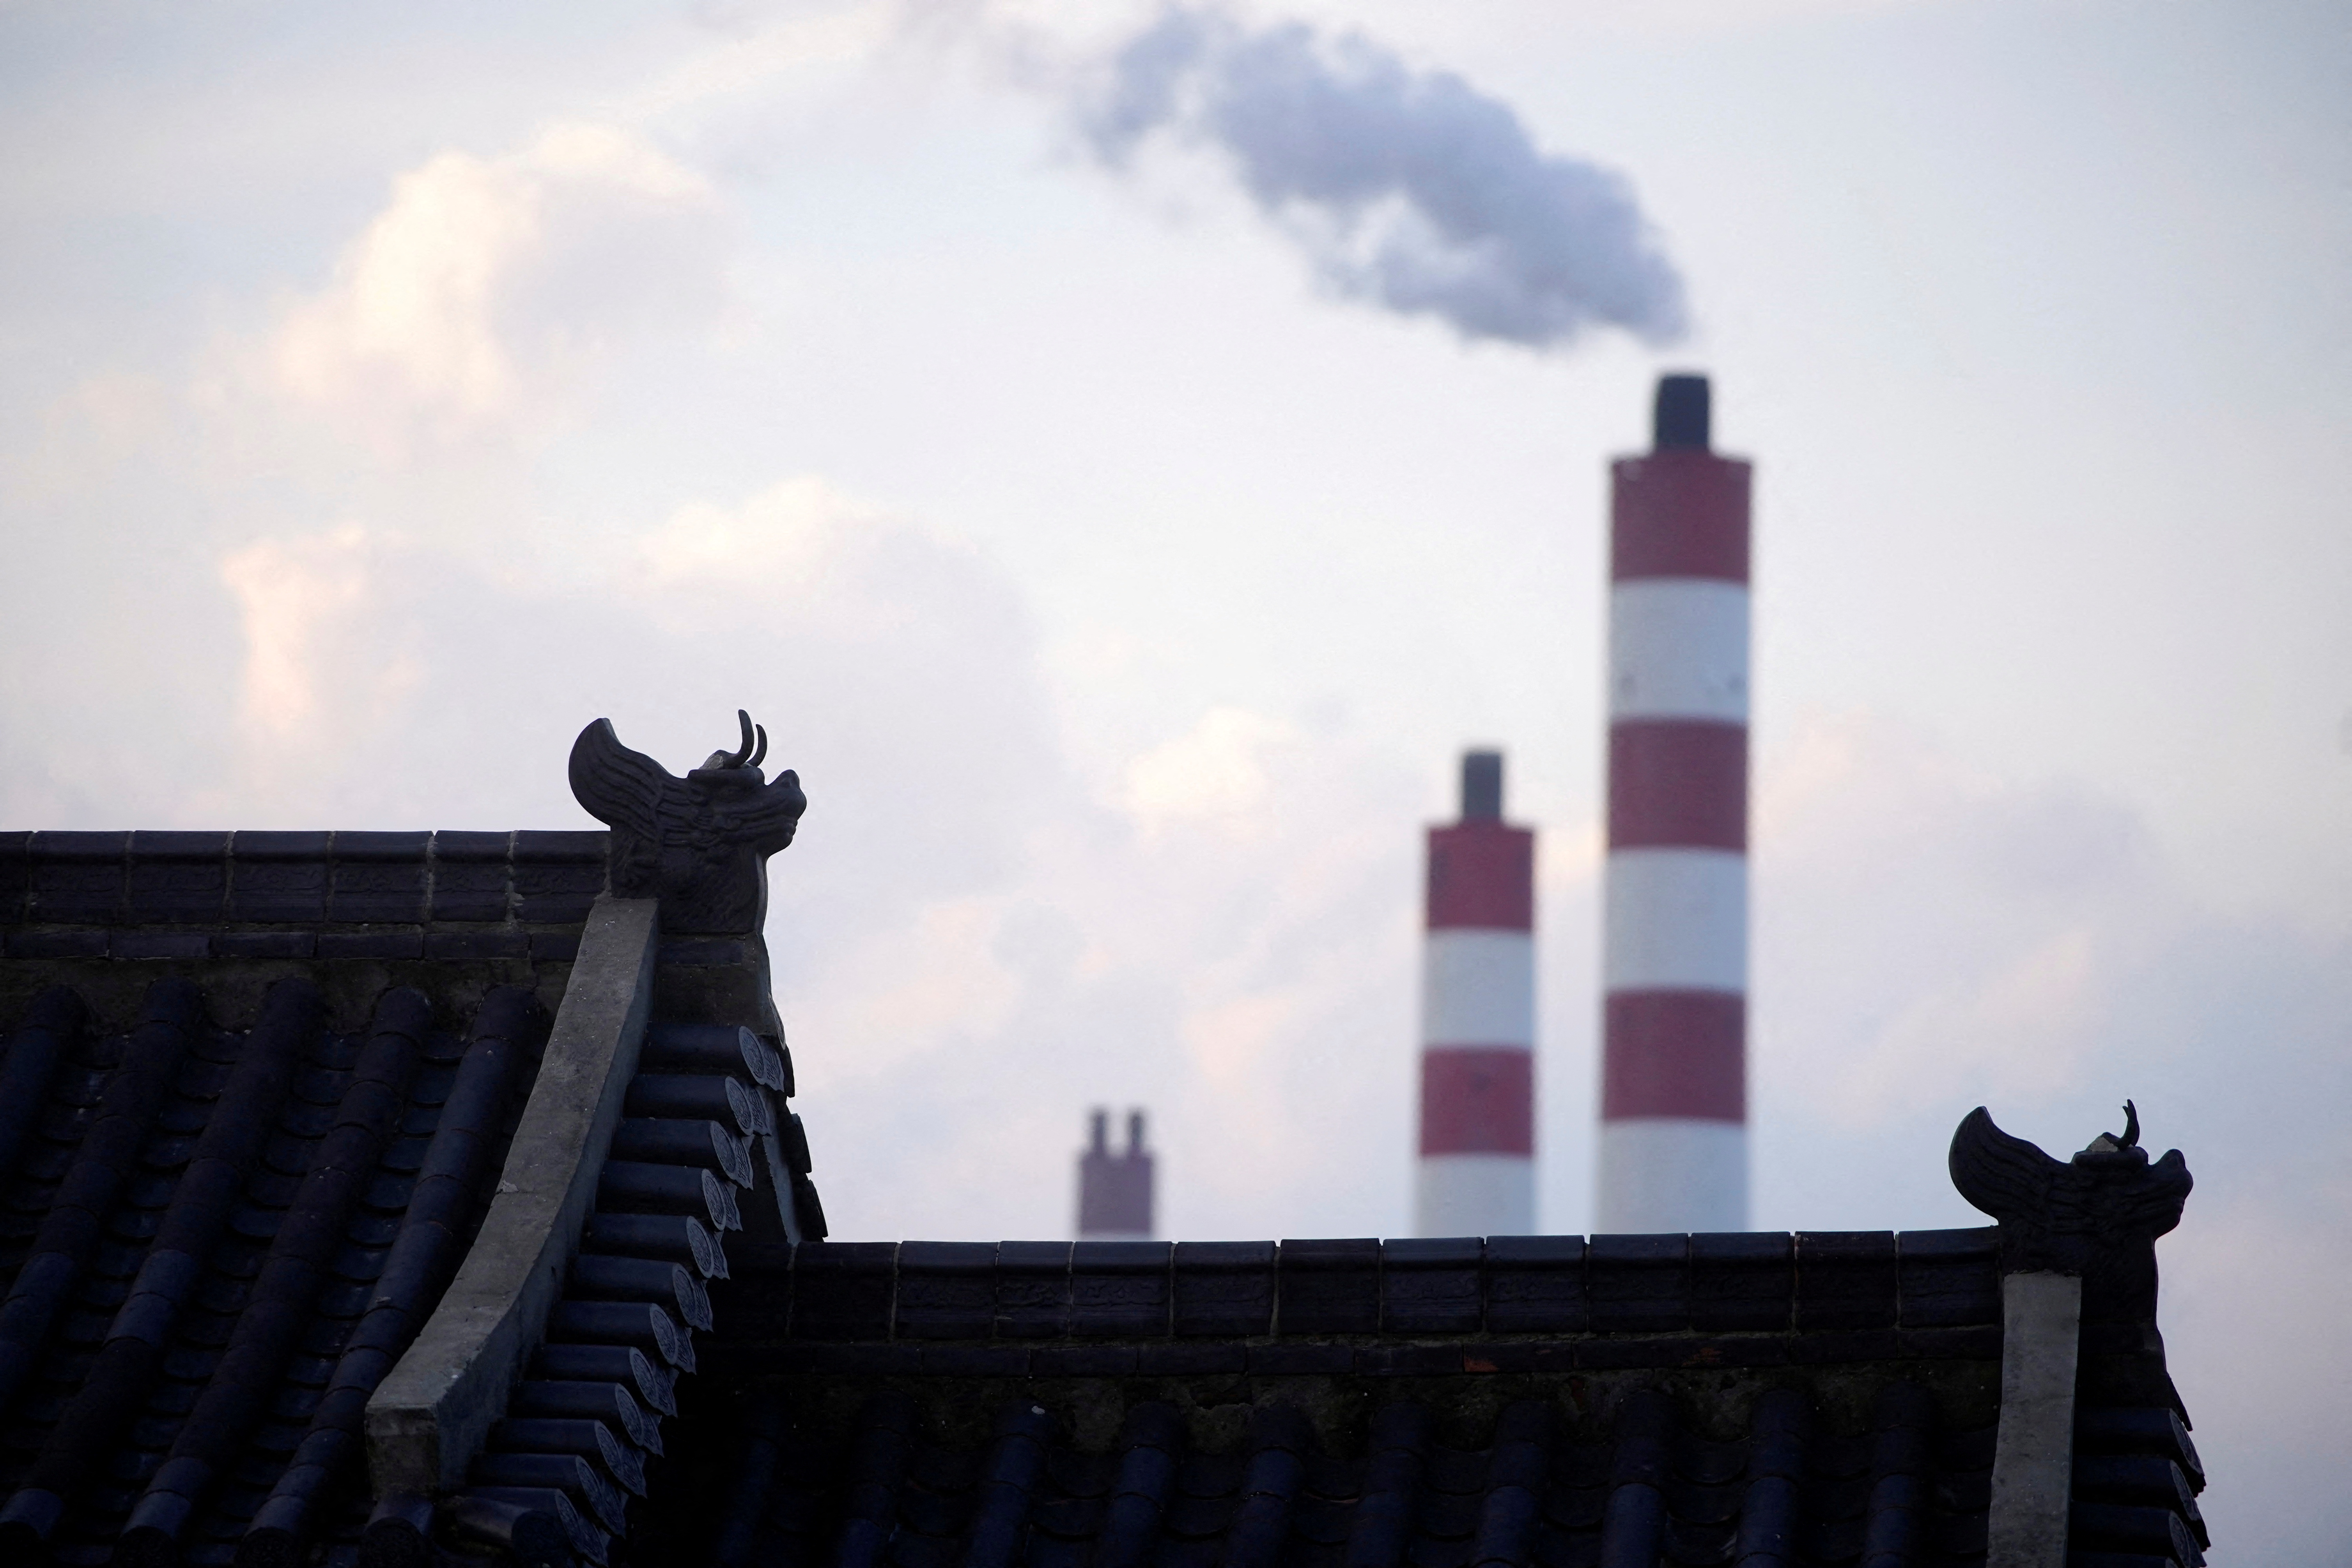 Chimneys of a coal-fired power plant are seen behind a gate in Shanghai